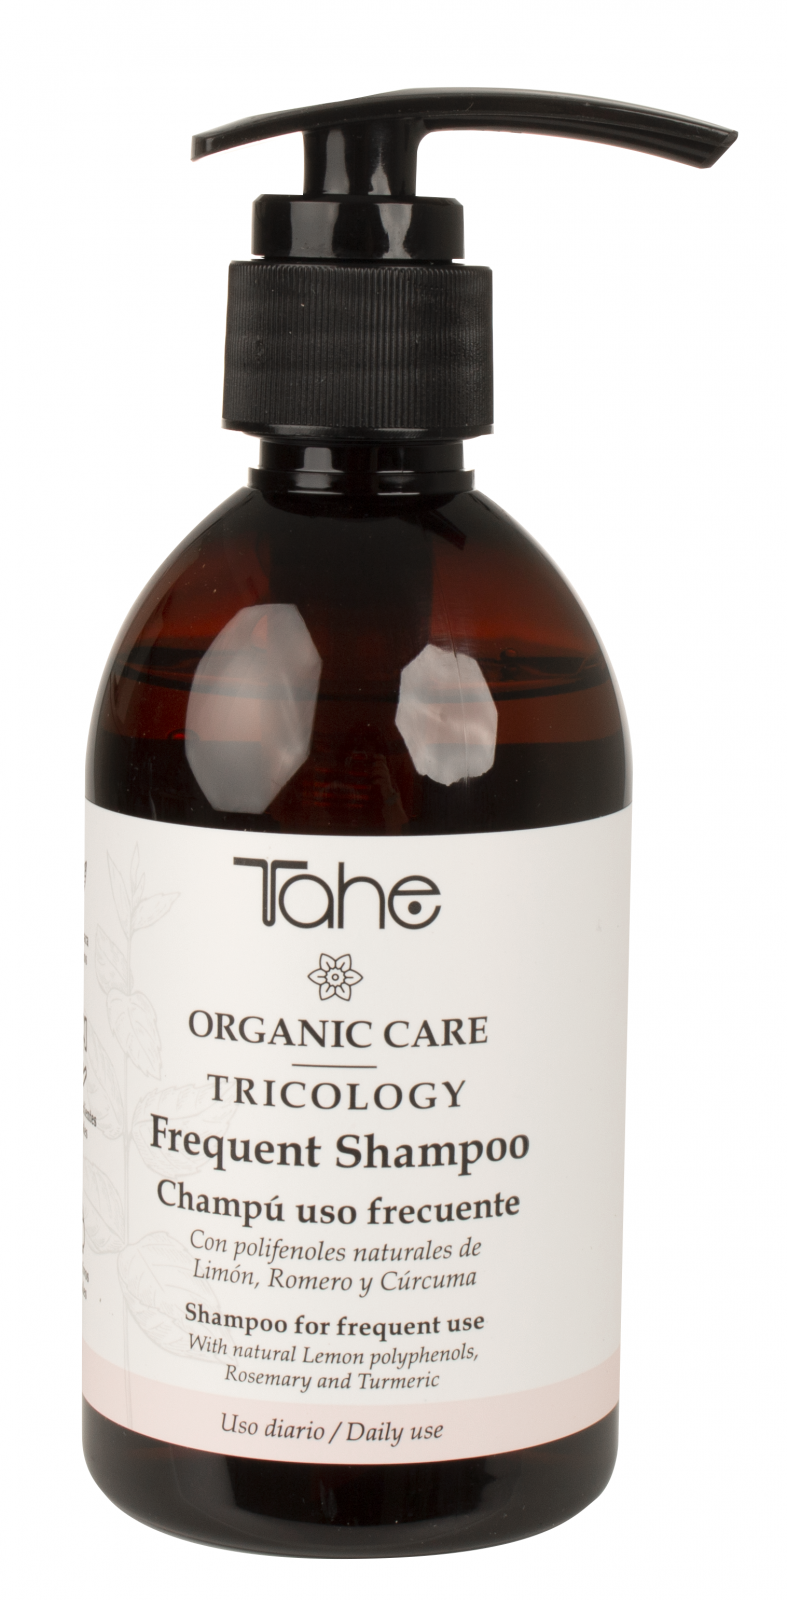 Frequent shampoo (300 ml) - for frequent washing TAHE